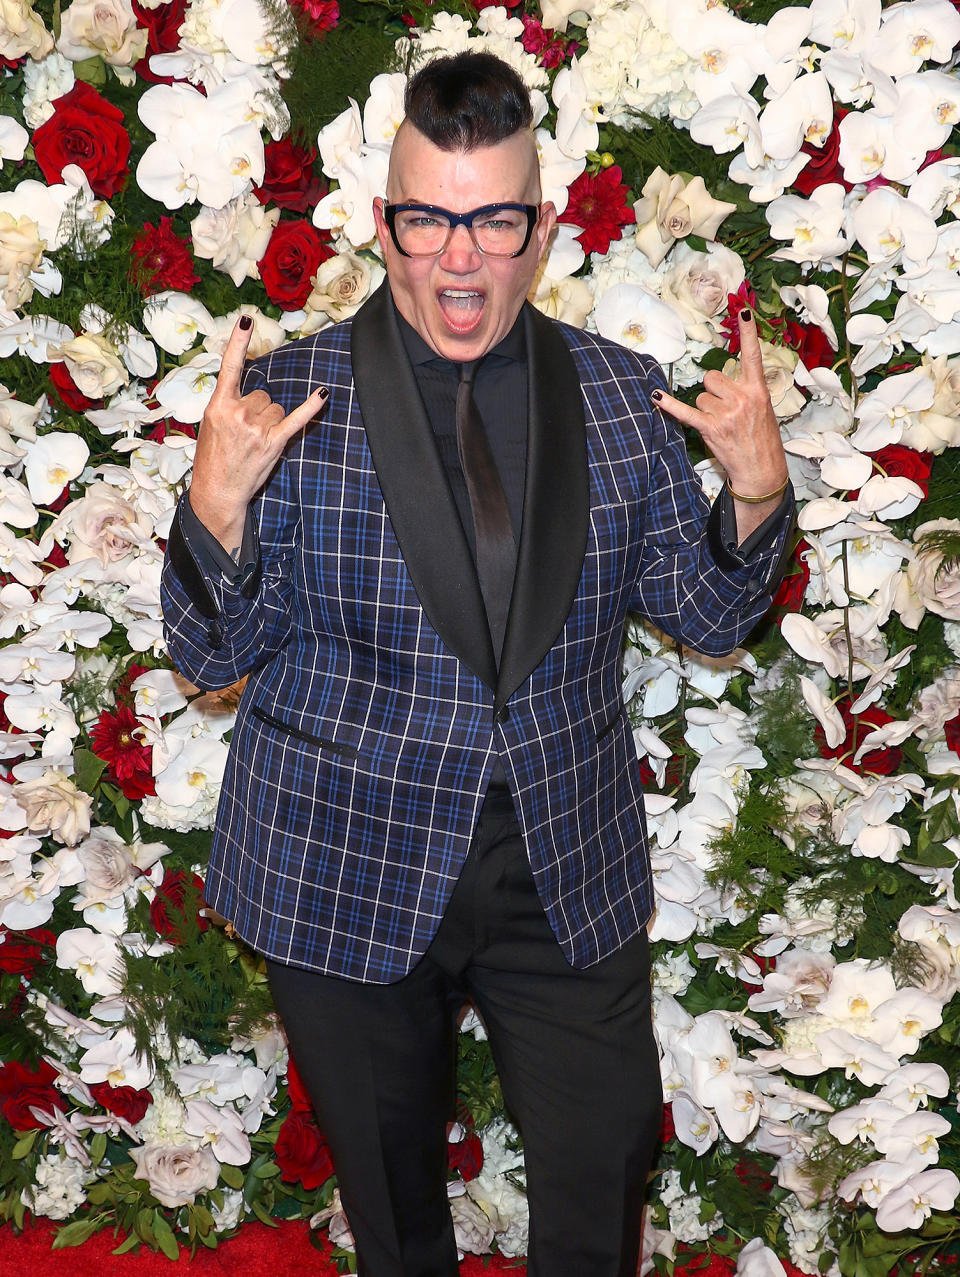 <p><b>"I'm the lesbian Jack Nicholson. I'm dating a whole lot of girls."</b> — Lea DeLaria, on her current relationship status, to PEOPLE</p>